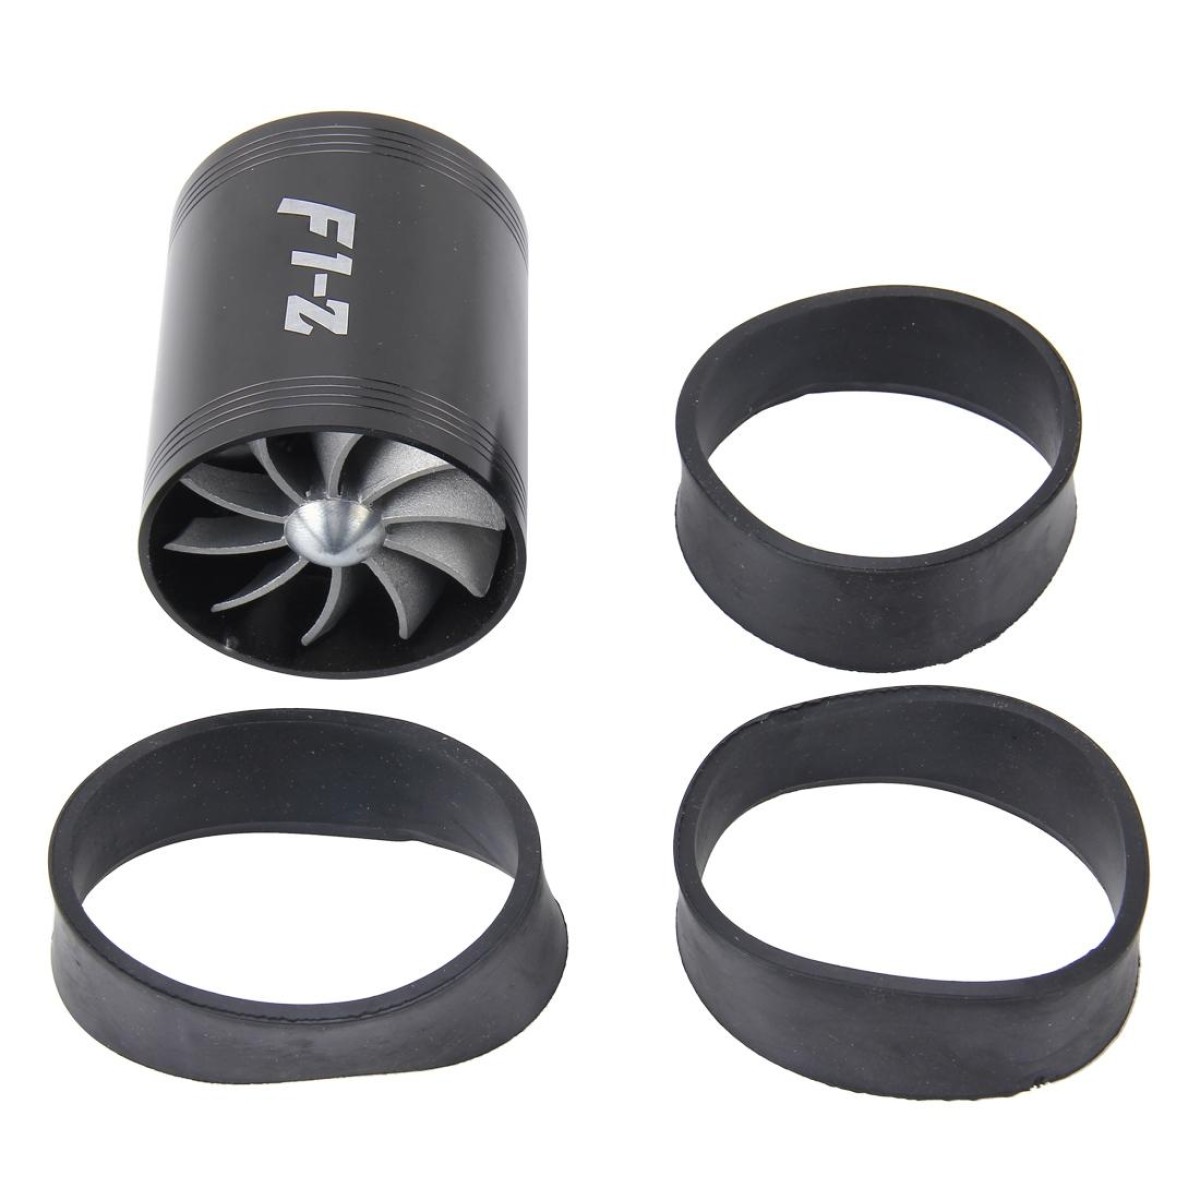 F1-Z Car Stainless Universal Supercharger Dual Double Turbine Air Intake Fuel Saver Turbo Turboing Charger Fan Set kit(Black)